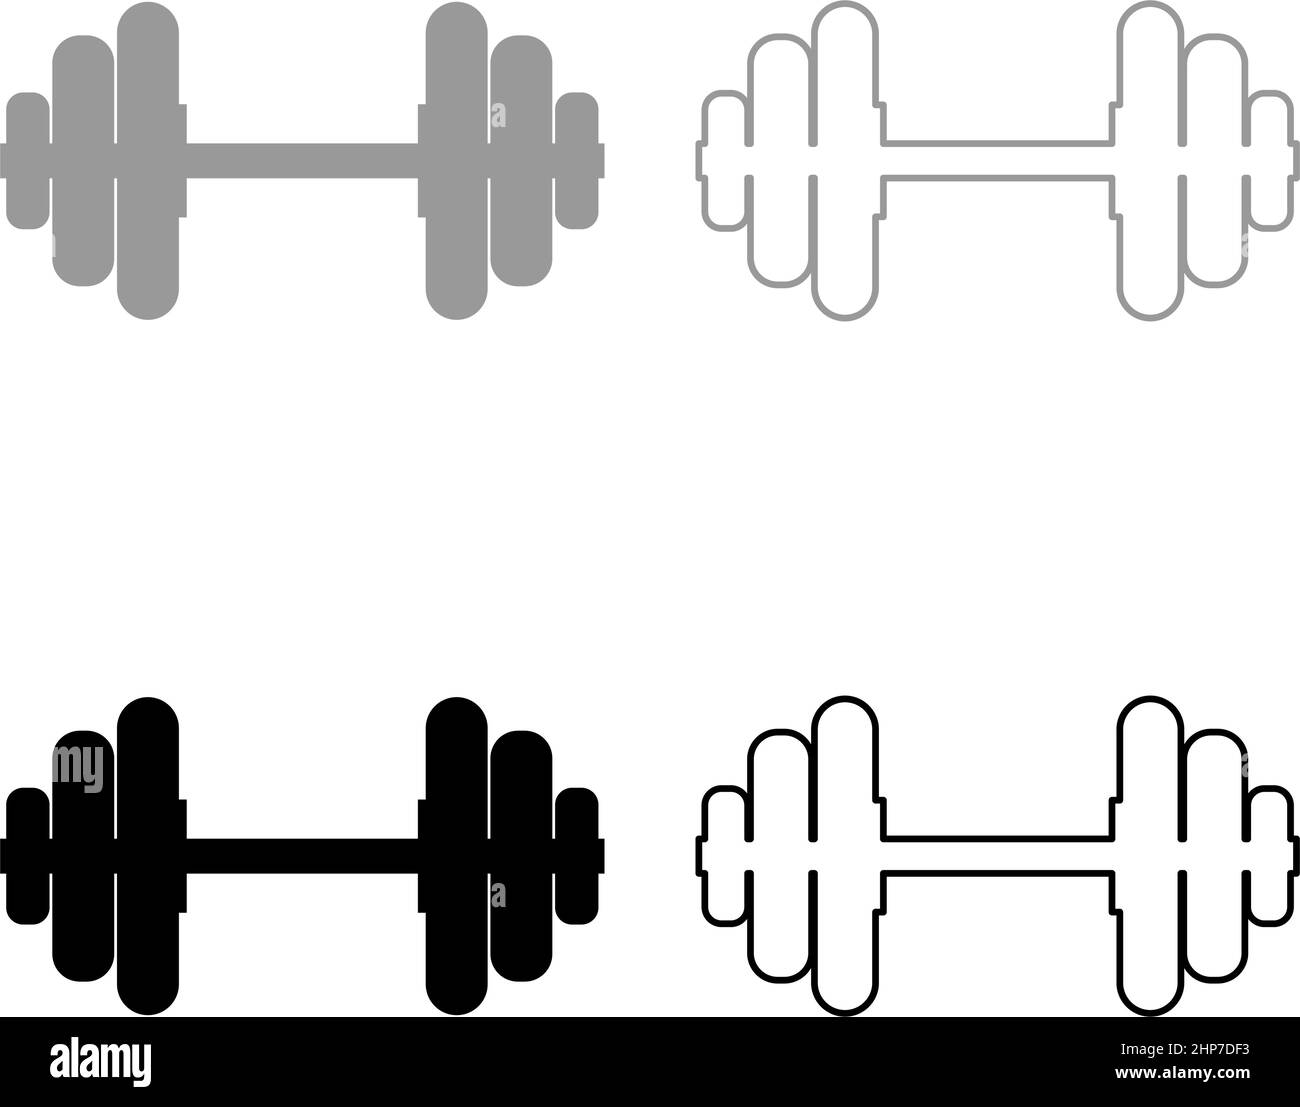 Dumbell Dumbbell disc weight training equipment set icon grey black color vector illustration image flat style solid fill outline contour line thin Stock Vector